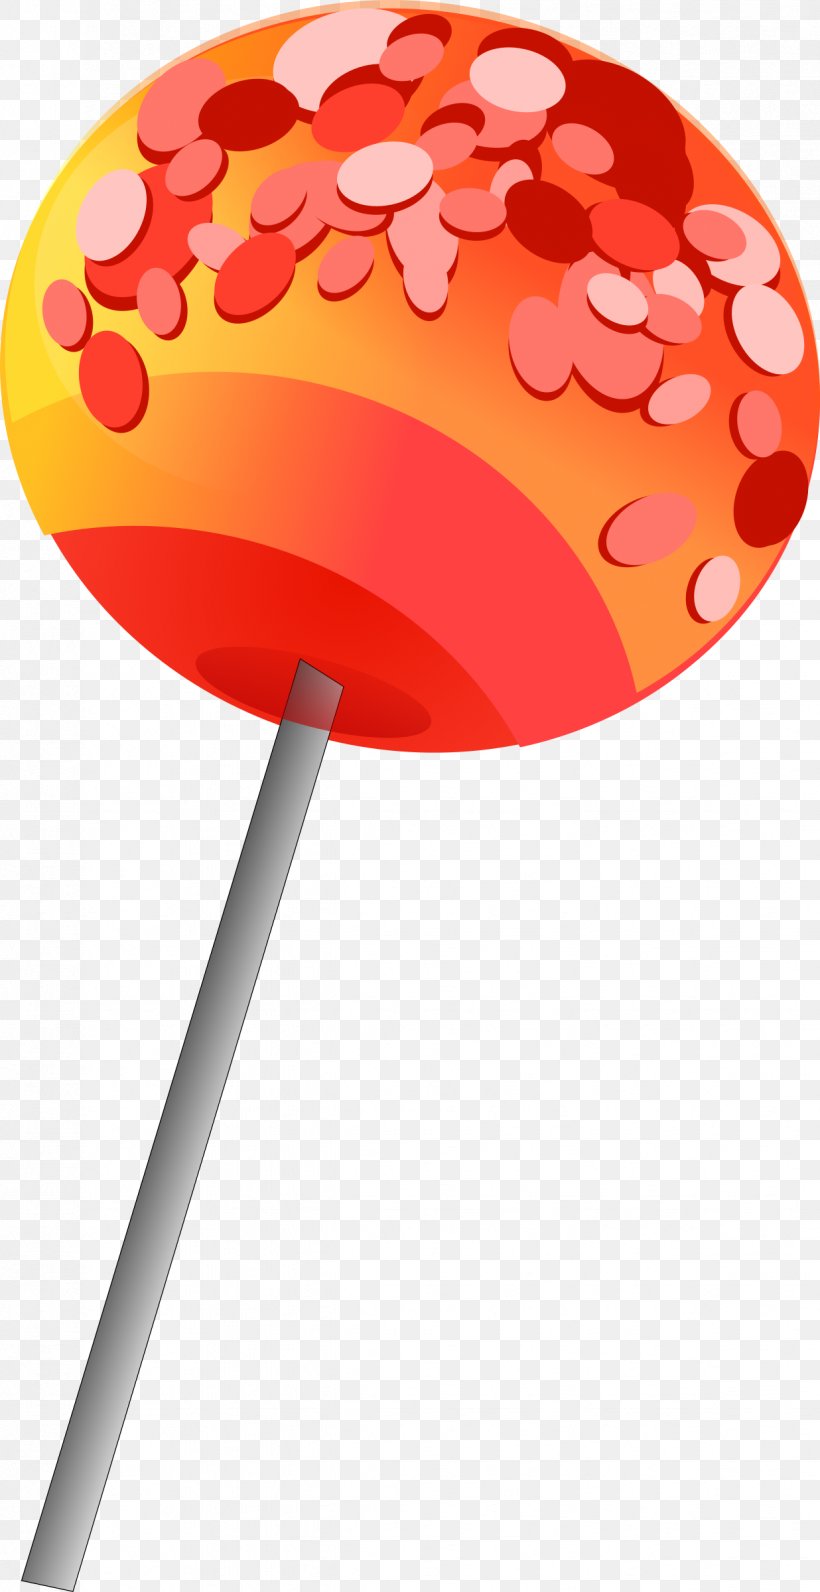 Lollipop Candy Cane Stick Candy Clip Art, PNG, 1236x2400px, Lollipop, Candy, Candy Cane, Caramel, Confectionery Download Free